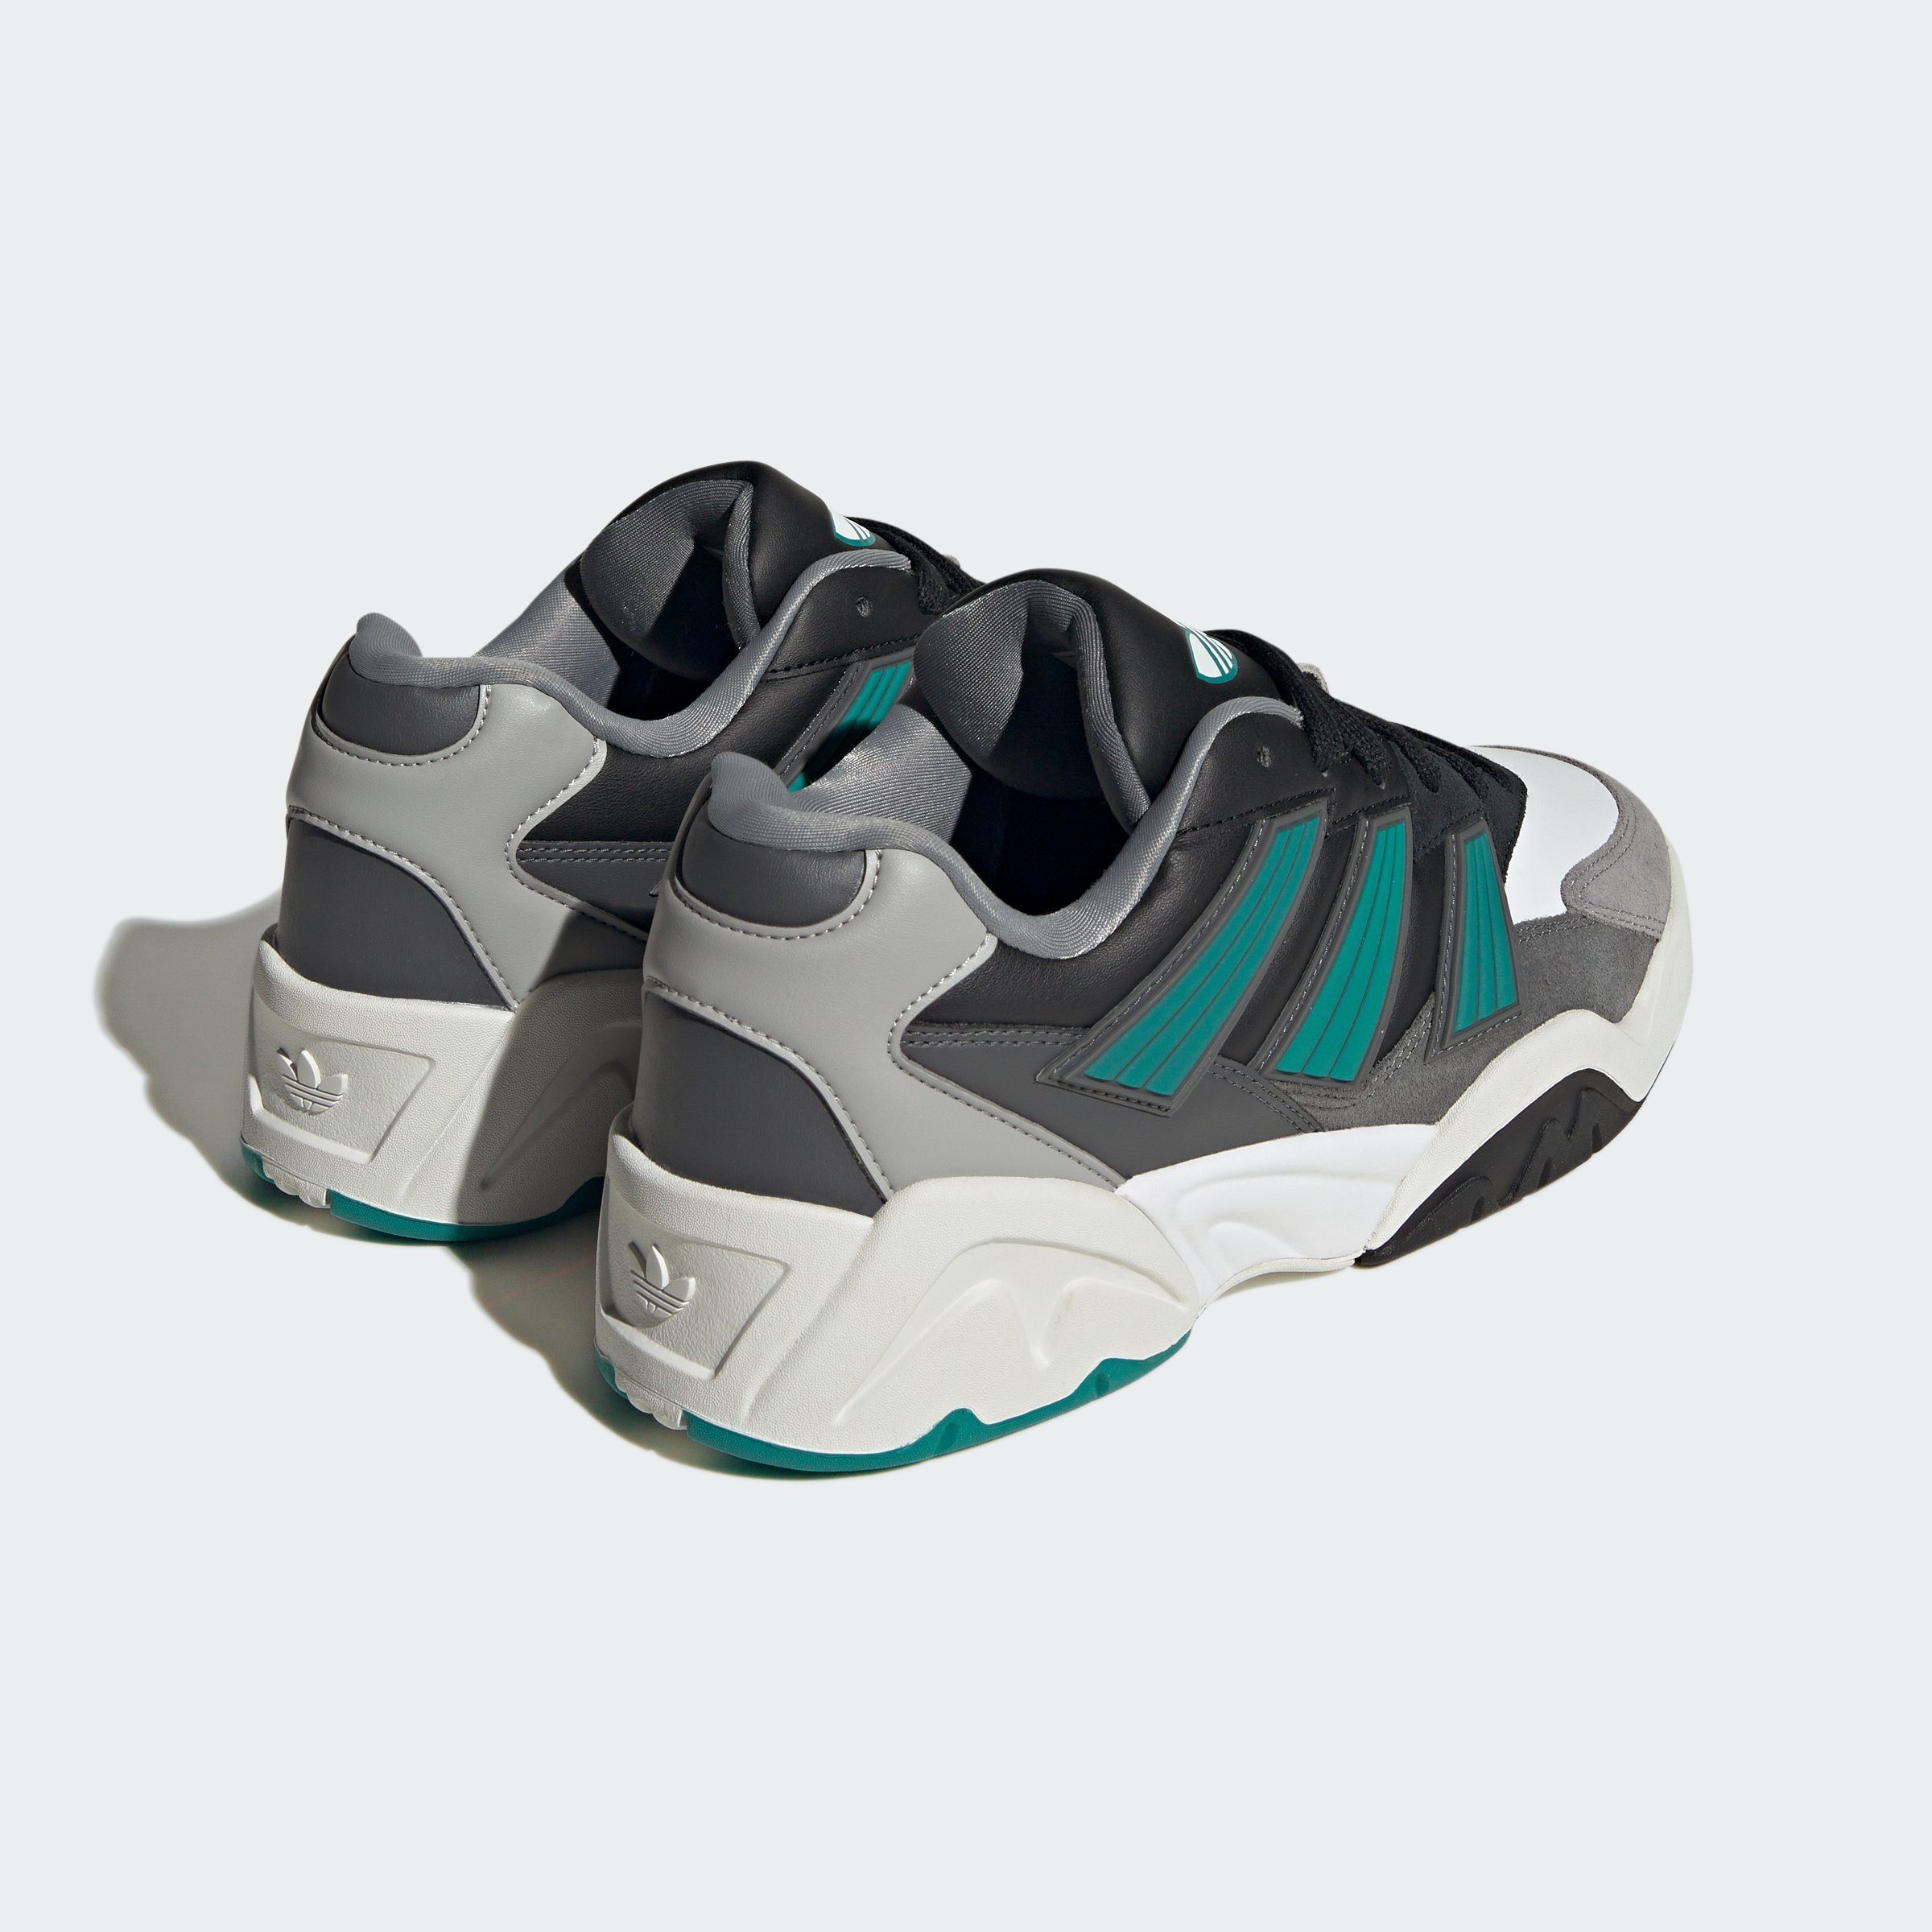 adidas Originals COURT Crystal White / Sneaker / Green Cloud White MAGNETIC Eqt